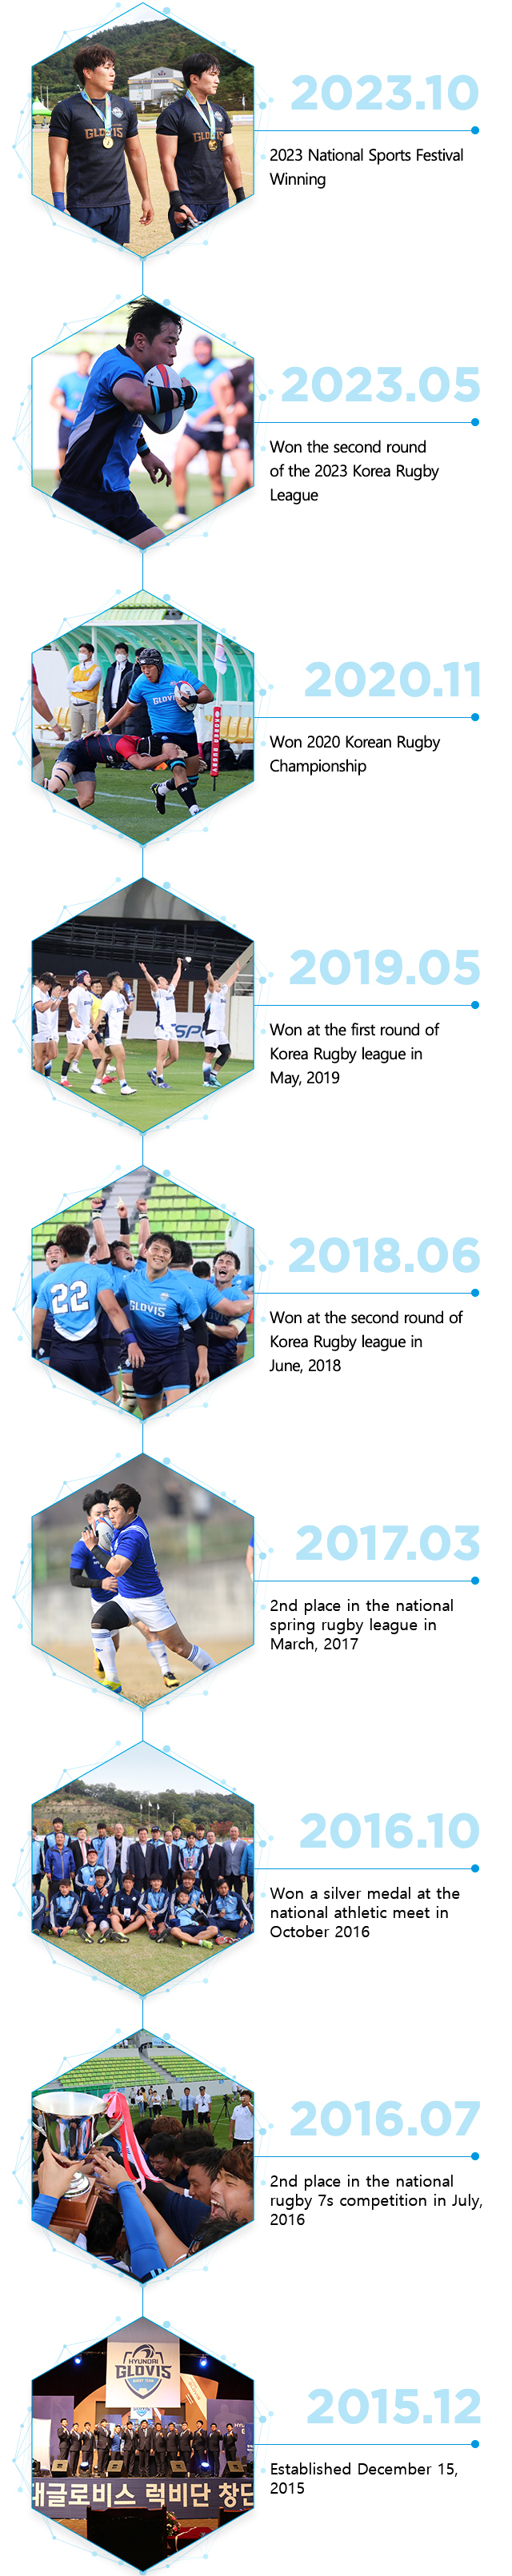 2023.10 - 2023 National Sports Festival Winning / 2023.05 - Won the second round of the 2023 Korea Rugby League / 2020.11 - Winner of the 2020 Korean Rugby Championship / 2019.05 - Winner of the first tournament of Korean Rugby League / 2018.06 - Winner of the second tournament of Korean Rugby League / 2017.03 - Runner-up of the Spring Season Rugby League Tournament / 2016.10 - Silver medalist of Korea National Sports Festival / 2016.07 - Runner-up of the National 7s Rugby Tournament / 2015.12 - Hyundai GLOVIS Rugby Team established in December 15